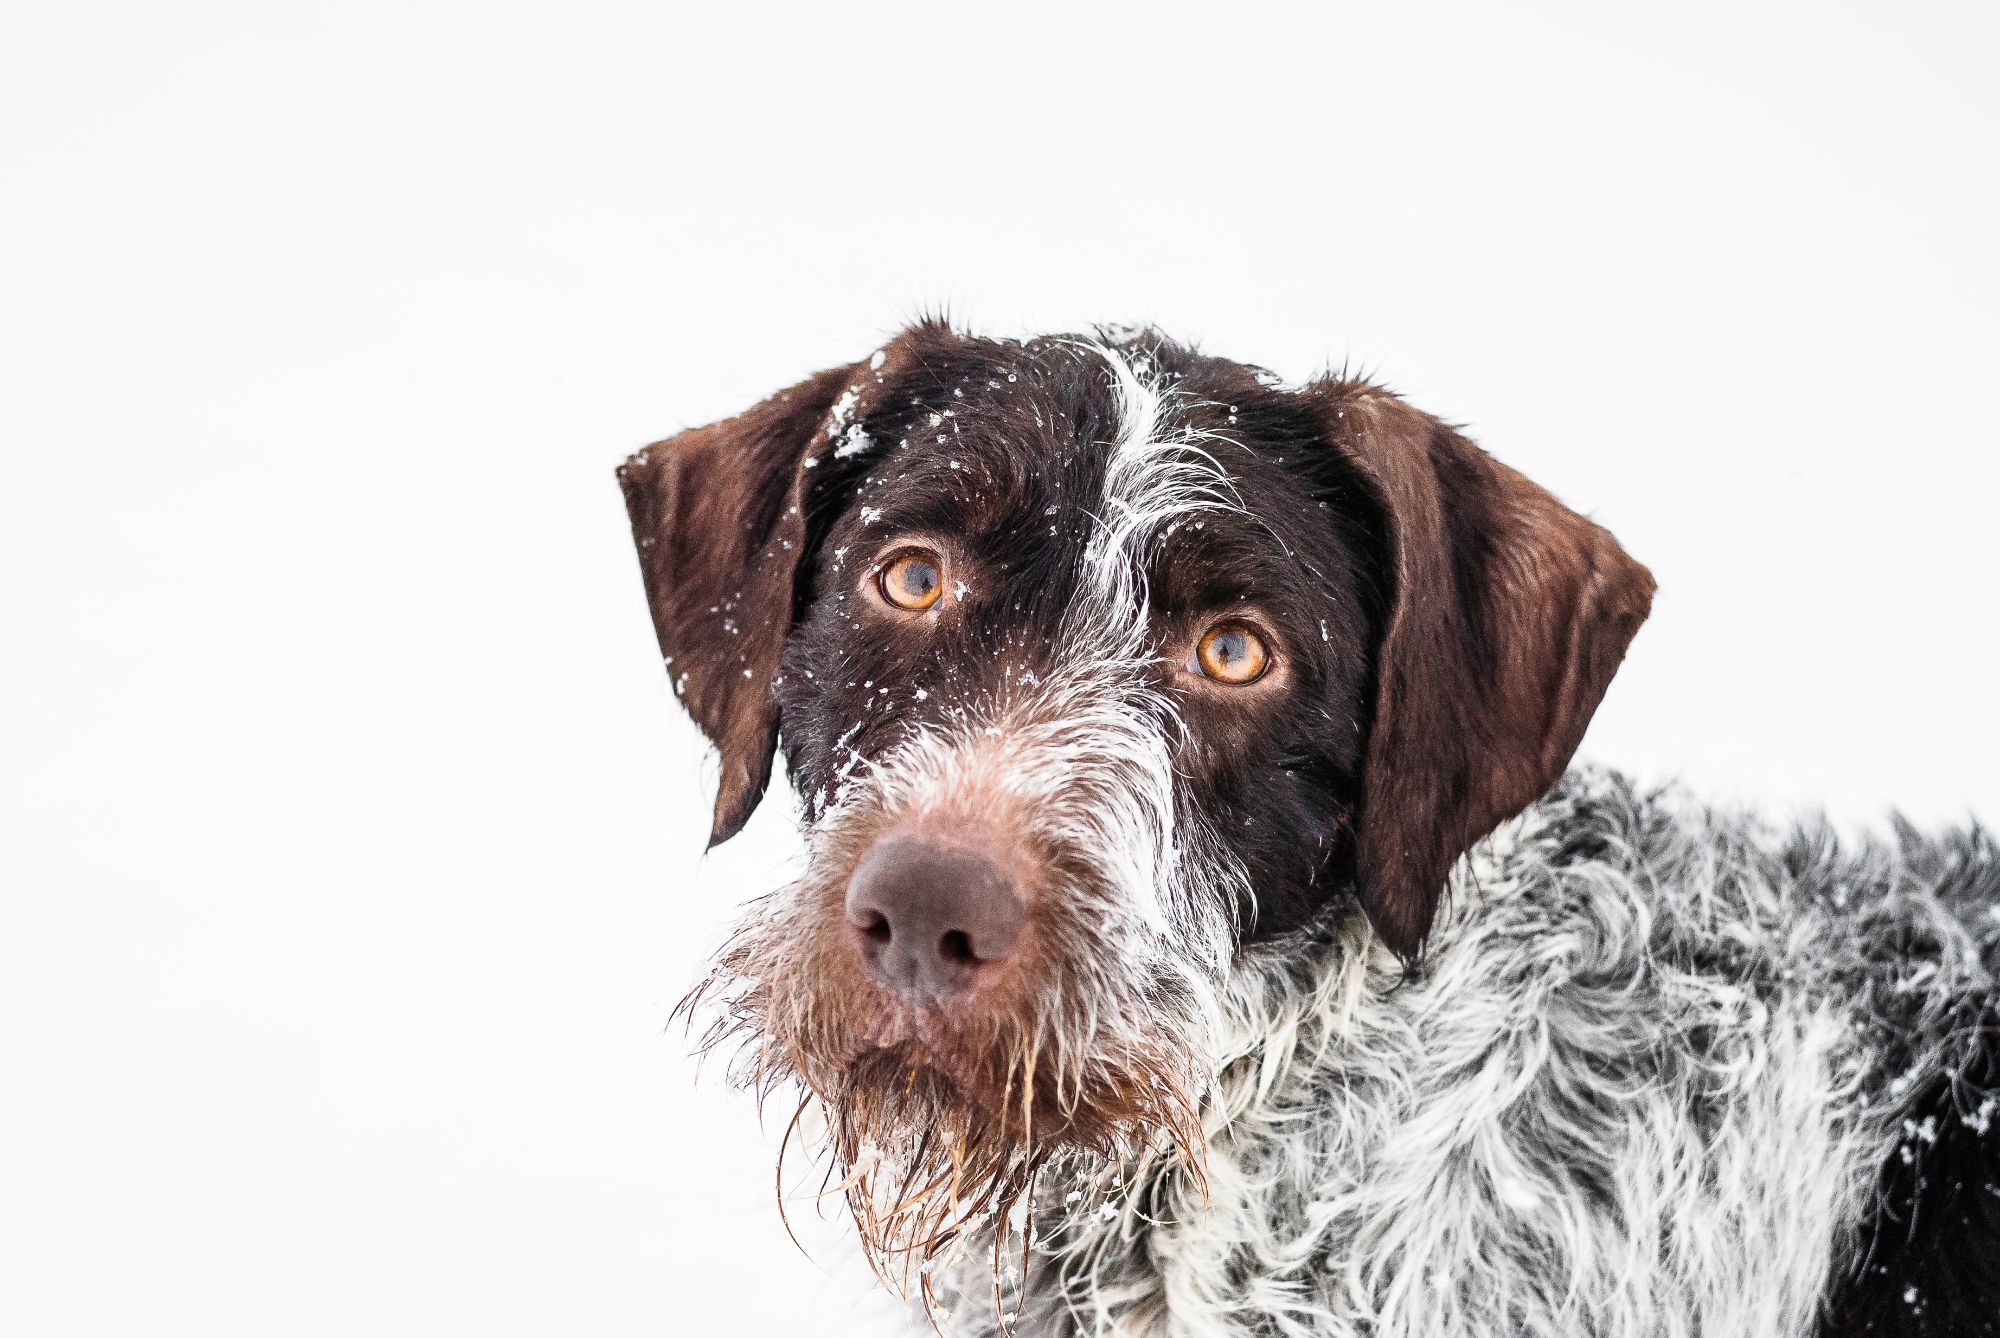 German Wirehaired Pointer looks up at her owner off camera during her snowy pet portrait session